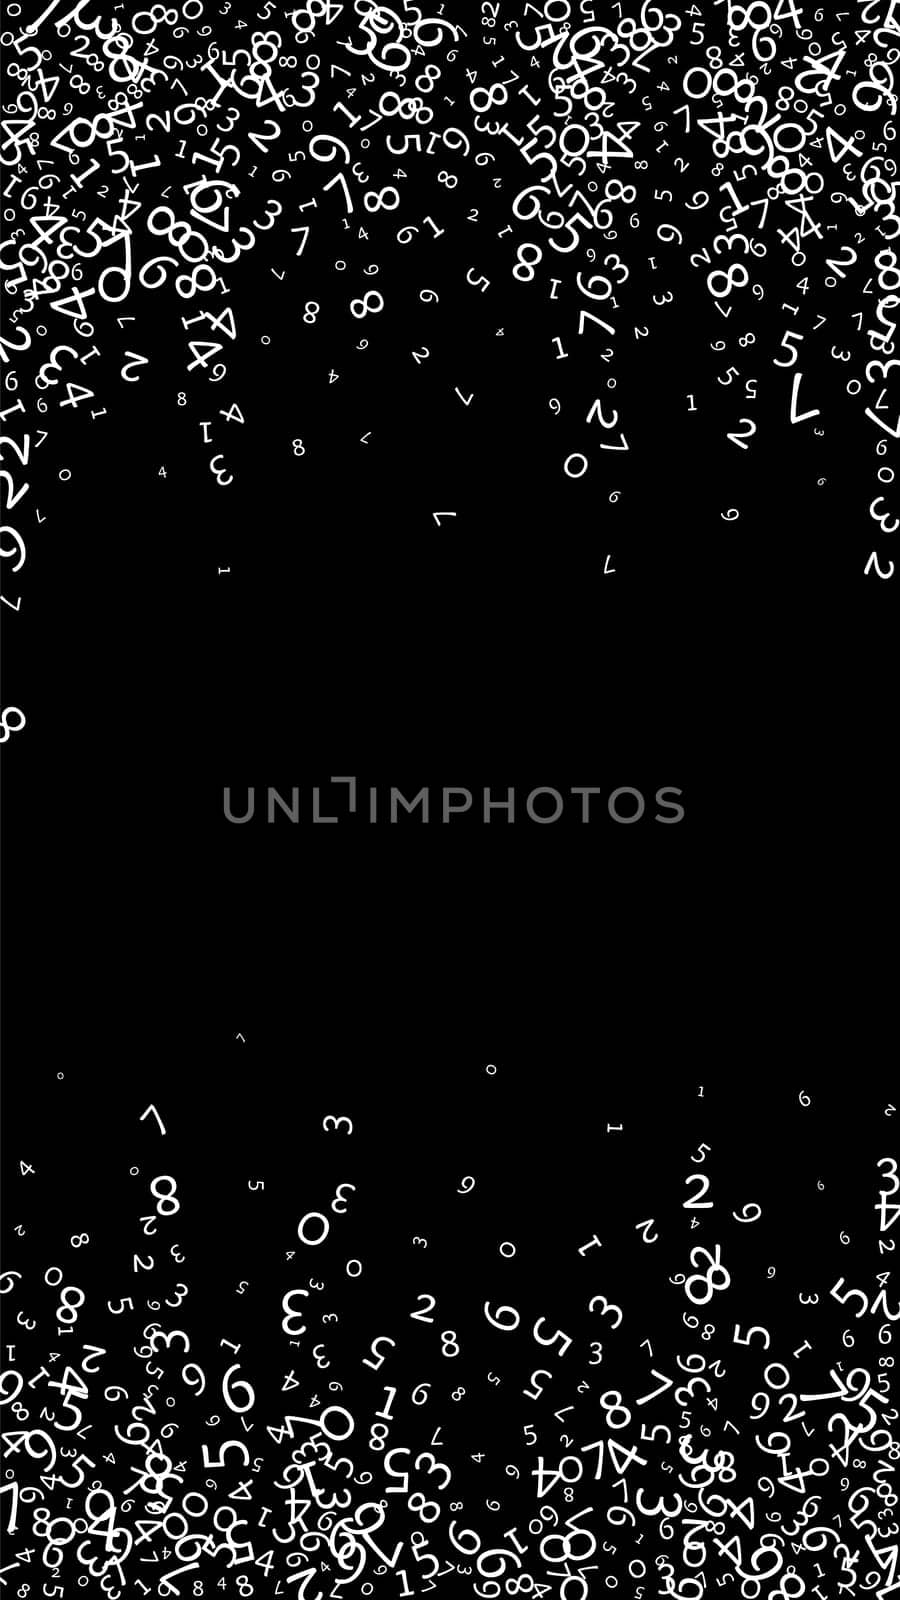 Falling numbers, big data concept. Binary white messy flying digits. Favorable futuristic banner on black background. Digital illustration with falling numbers.